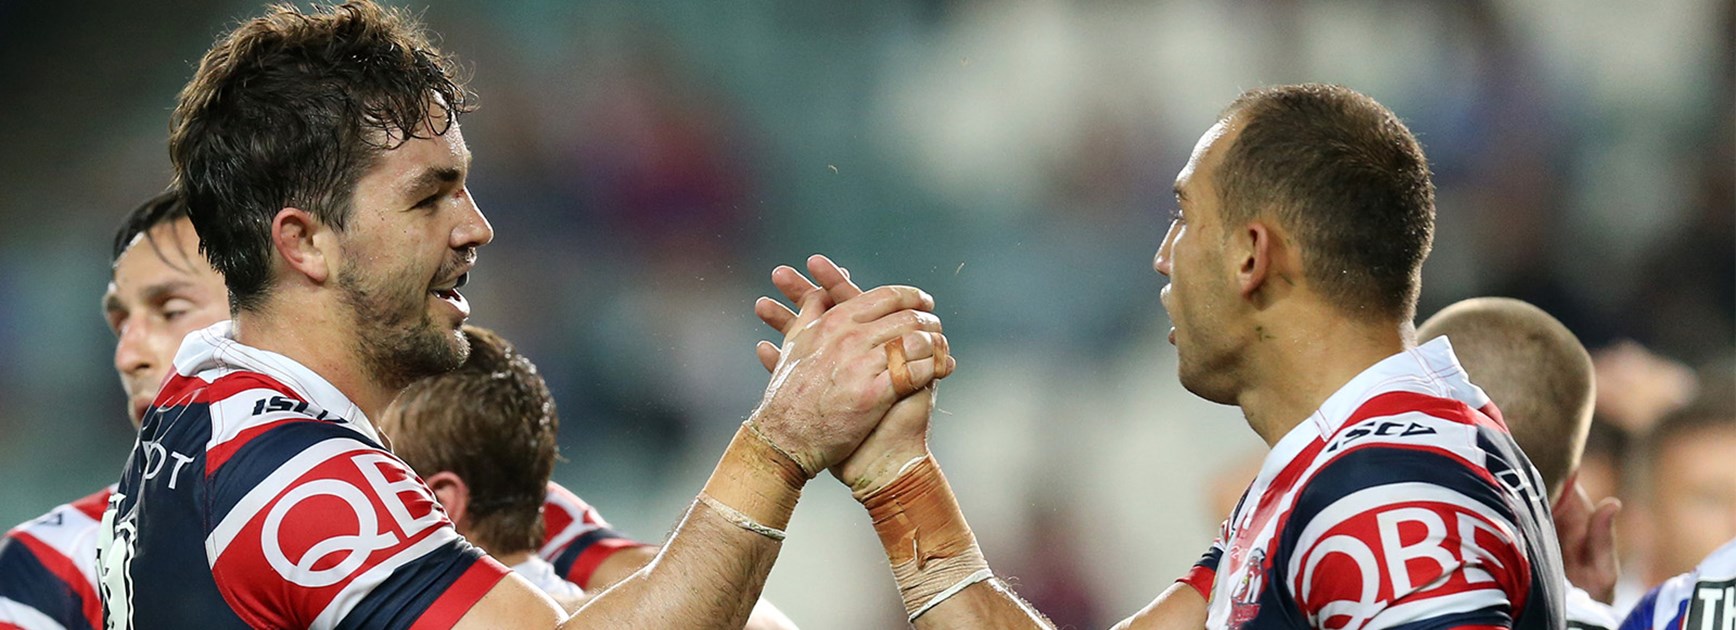 The Roosters celebrate Blake Ferguson's try against the Knights in Round 9.